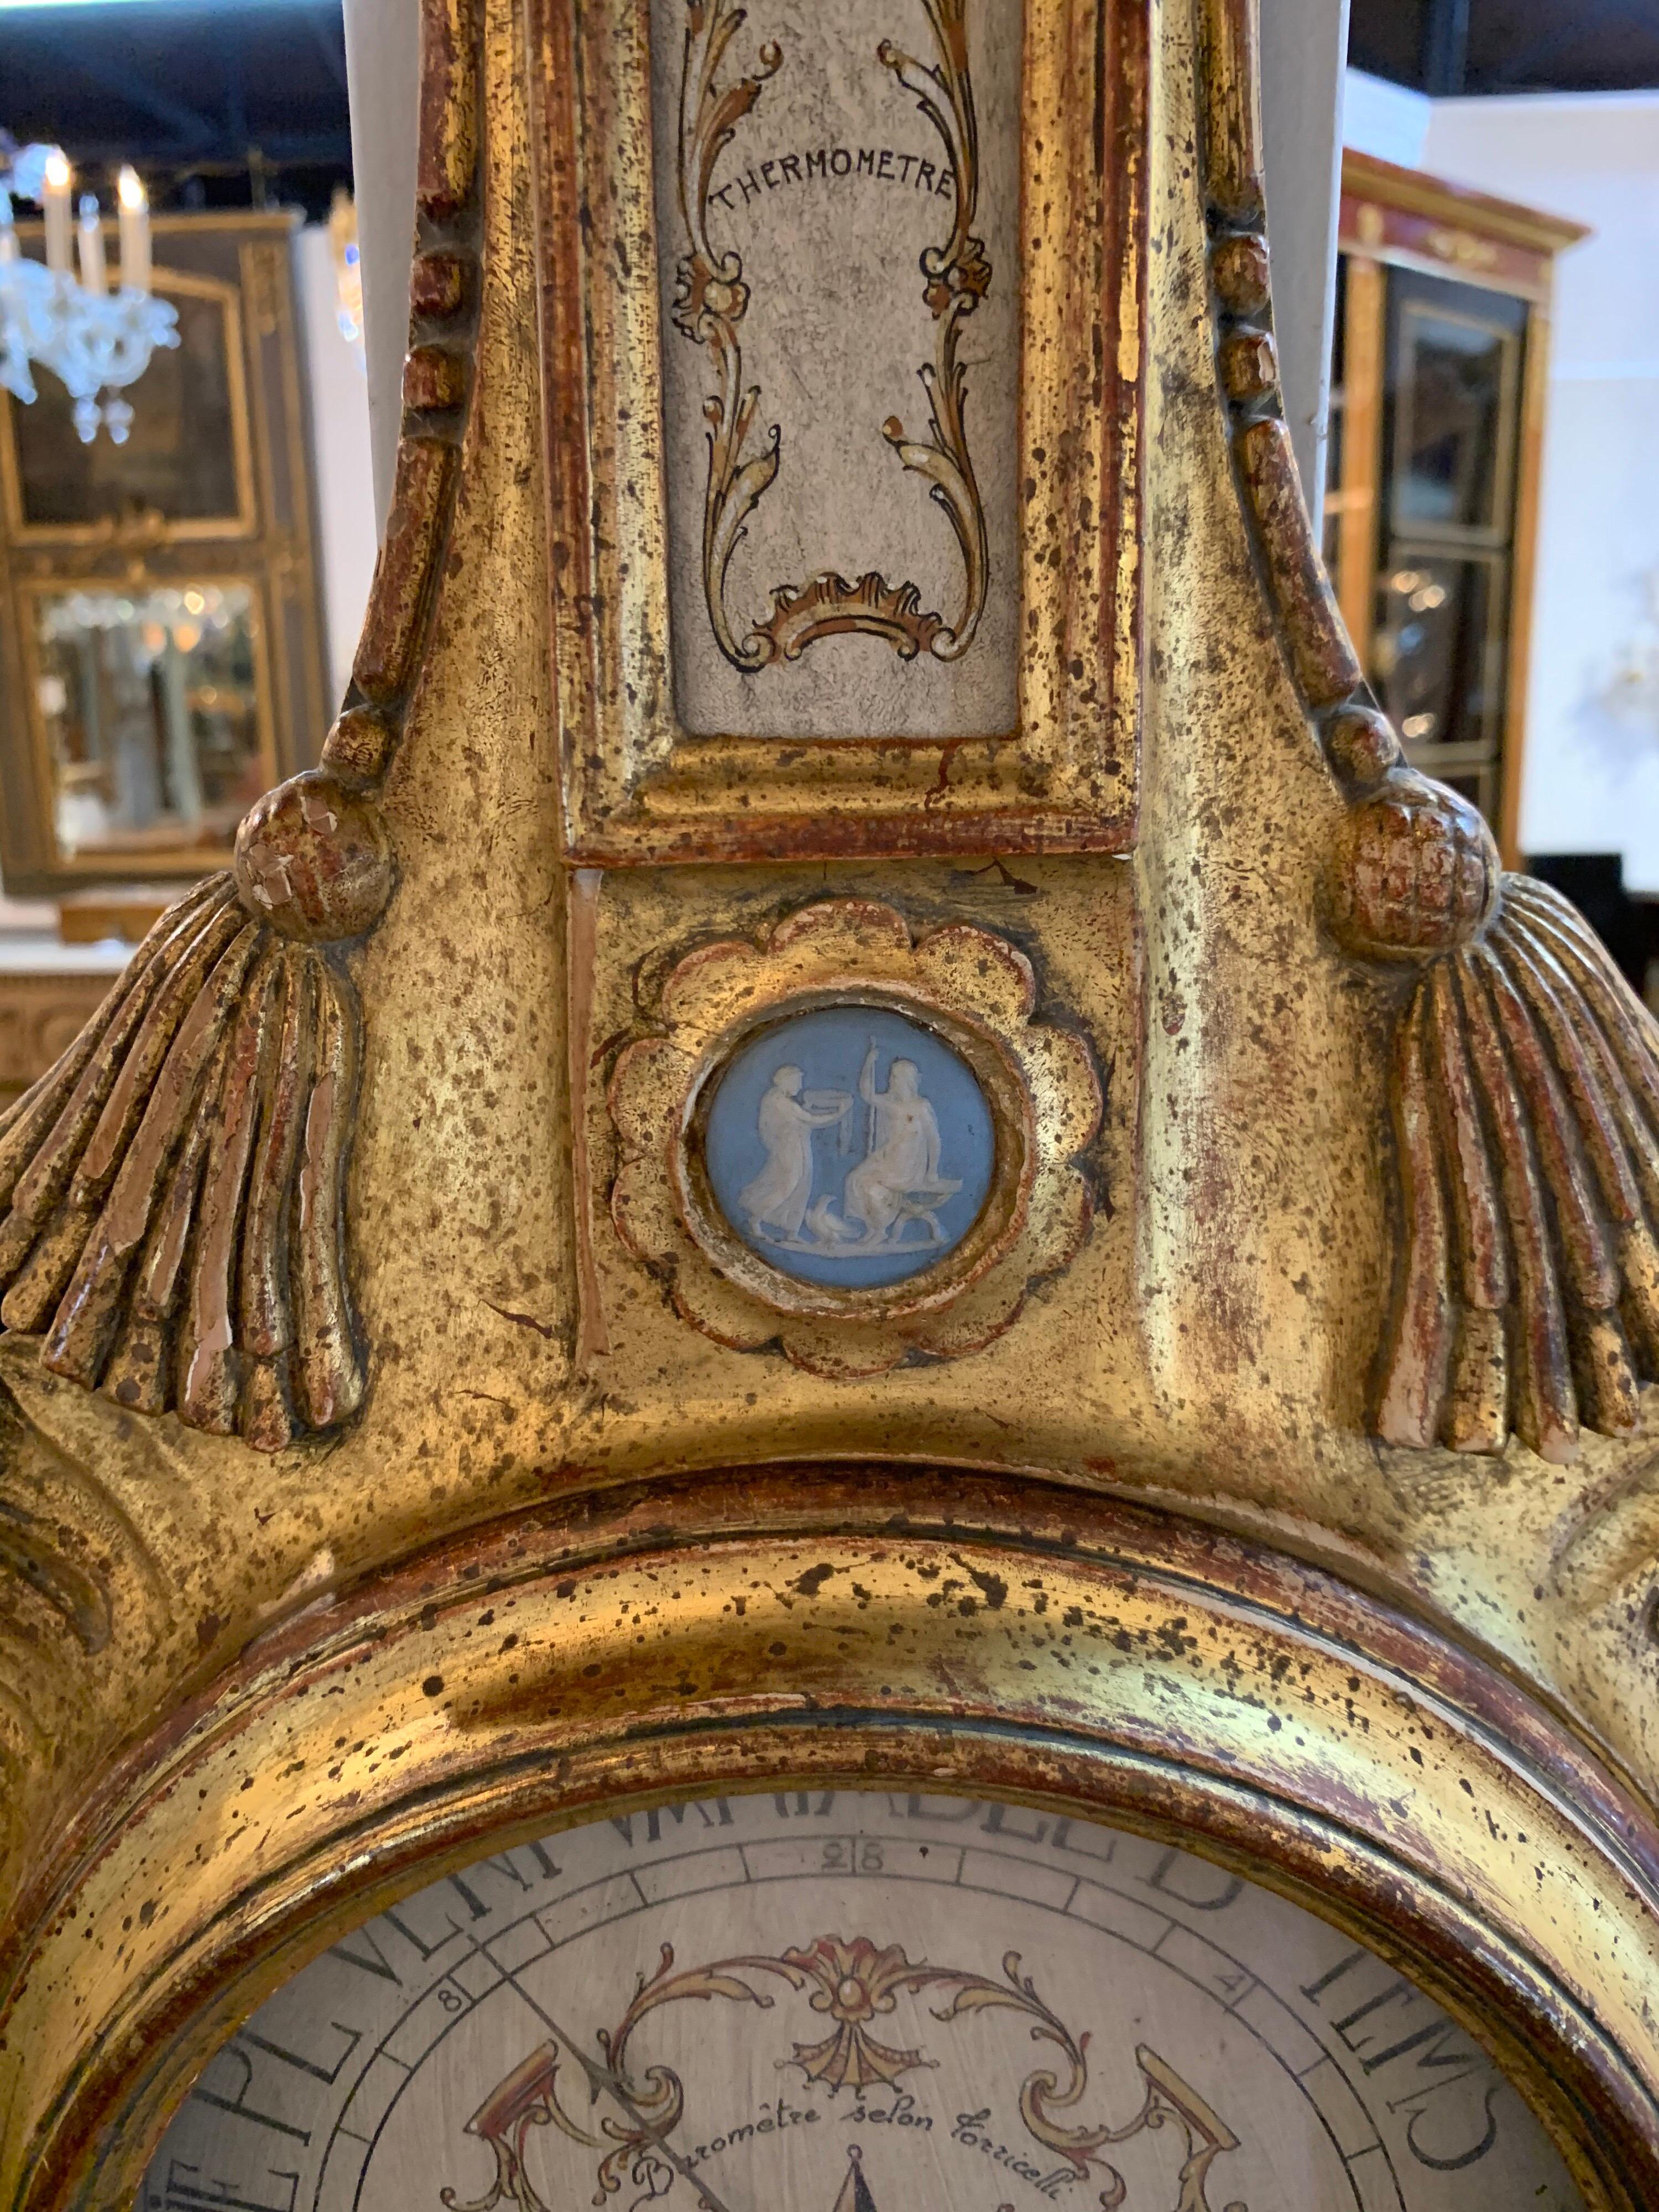 Beautiful 19th century French carved giltwood barometer. Lovely carvings of an urn with overflowing leaves and very fine gilt as well. So pretty!